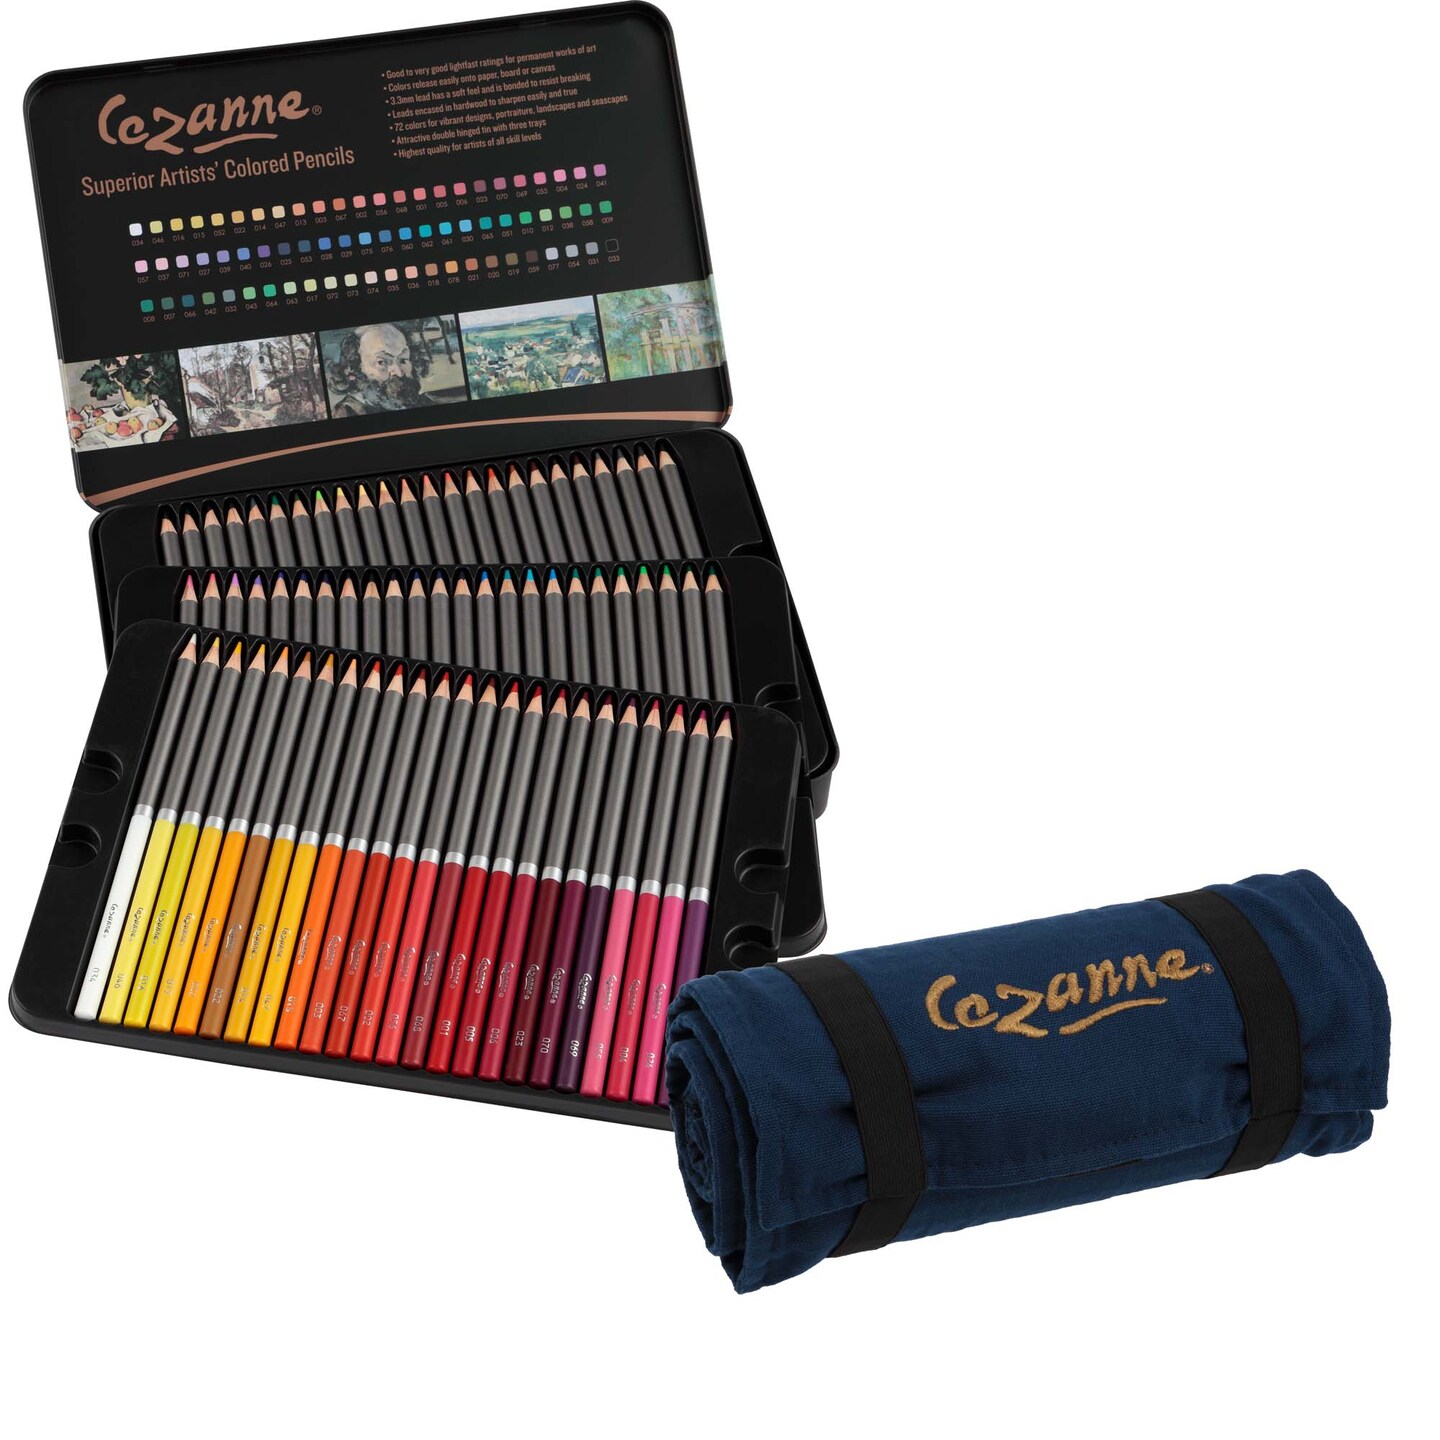 Cezanne Sets of Professional Colored Pencils with Canvas Roll-Up Case - Premium, High Pigment Colored Pencils, 3.3mm Diameter Lead and Storage Case with Zipper Pouch